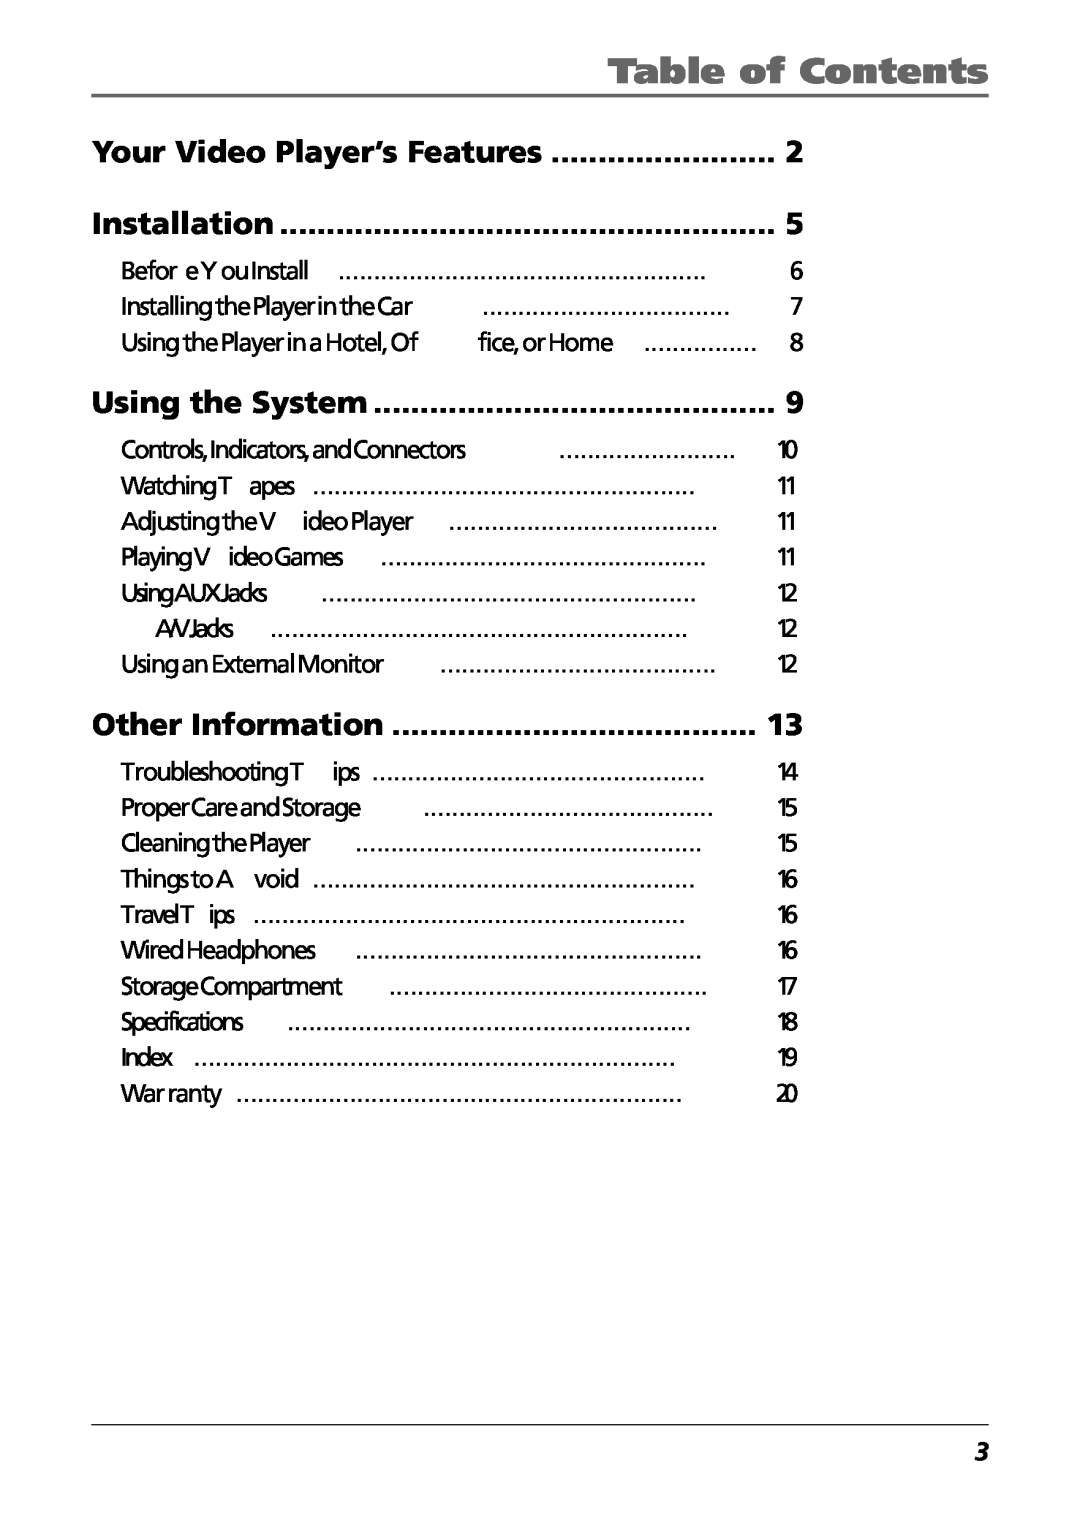 RCA Mobile Video Cassette Player manual Table of Contents, Your Video Player’s Features, Installation, Using the System 